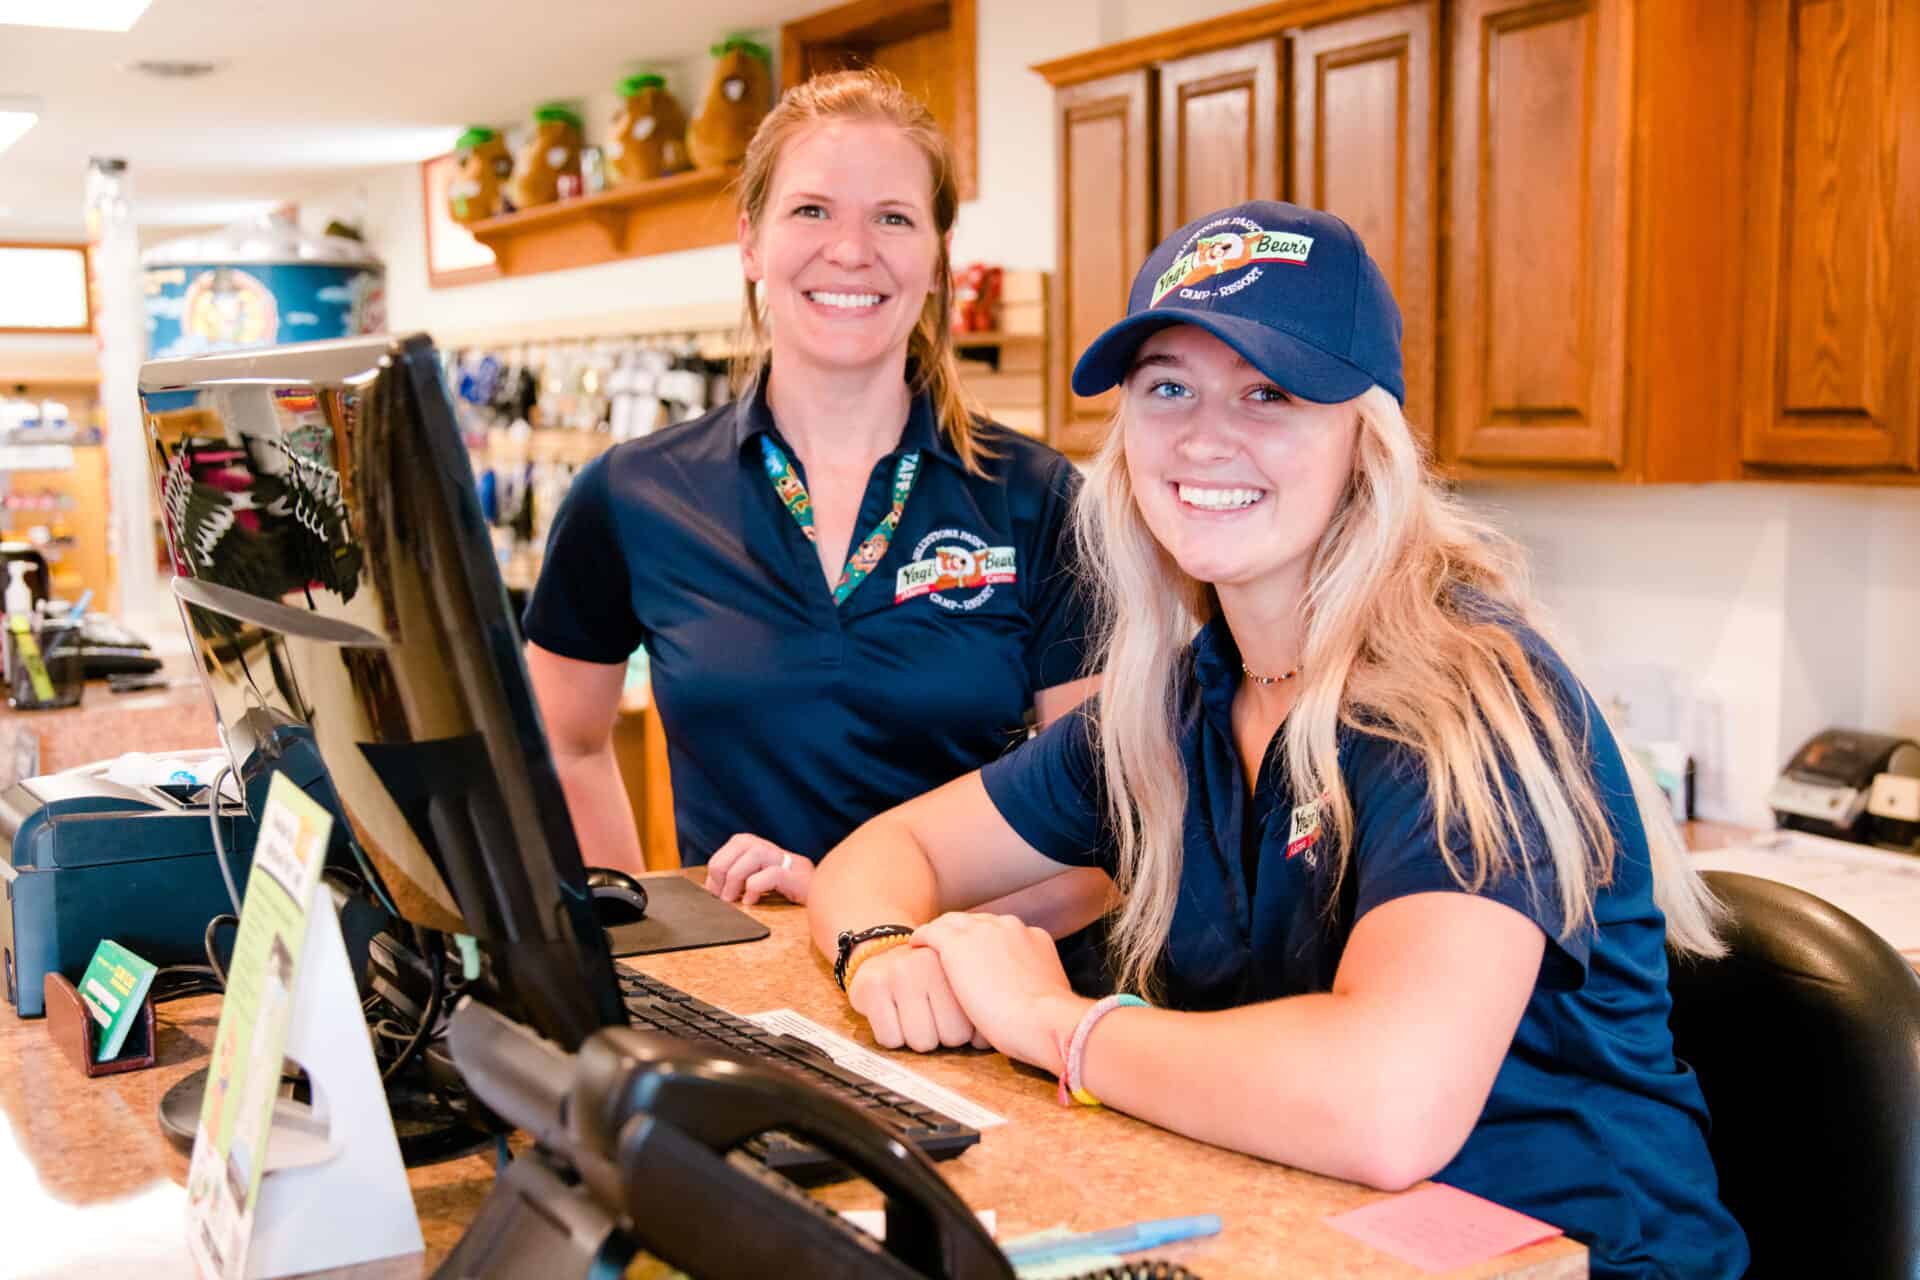 Two women smiling at the counter of a store, enjoying the amenities.